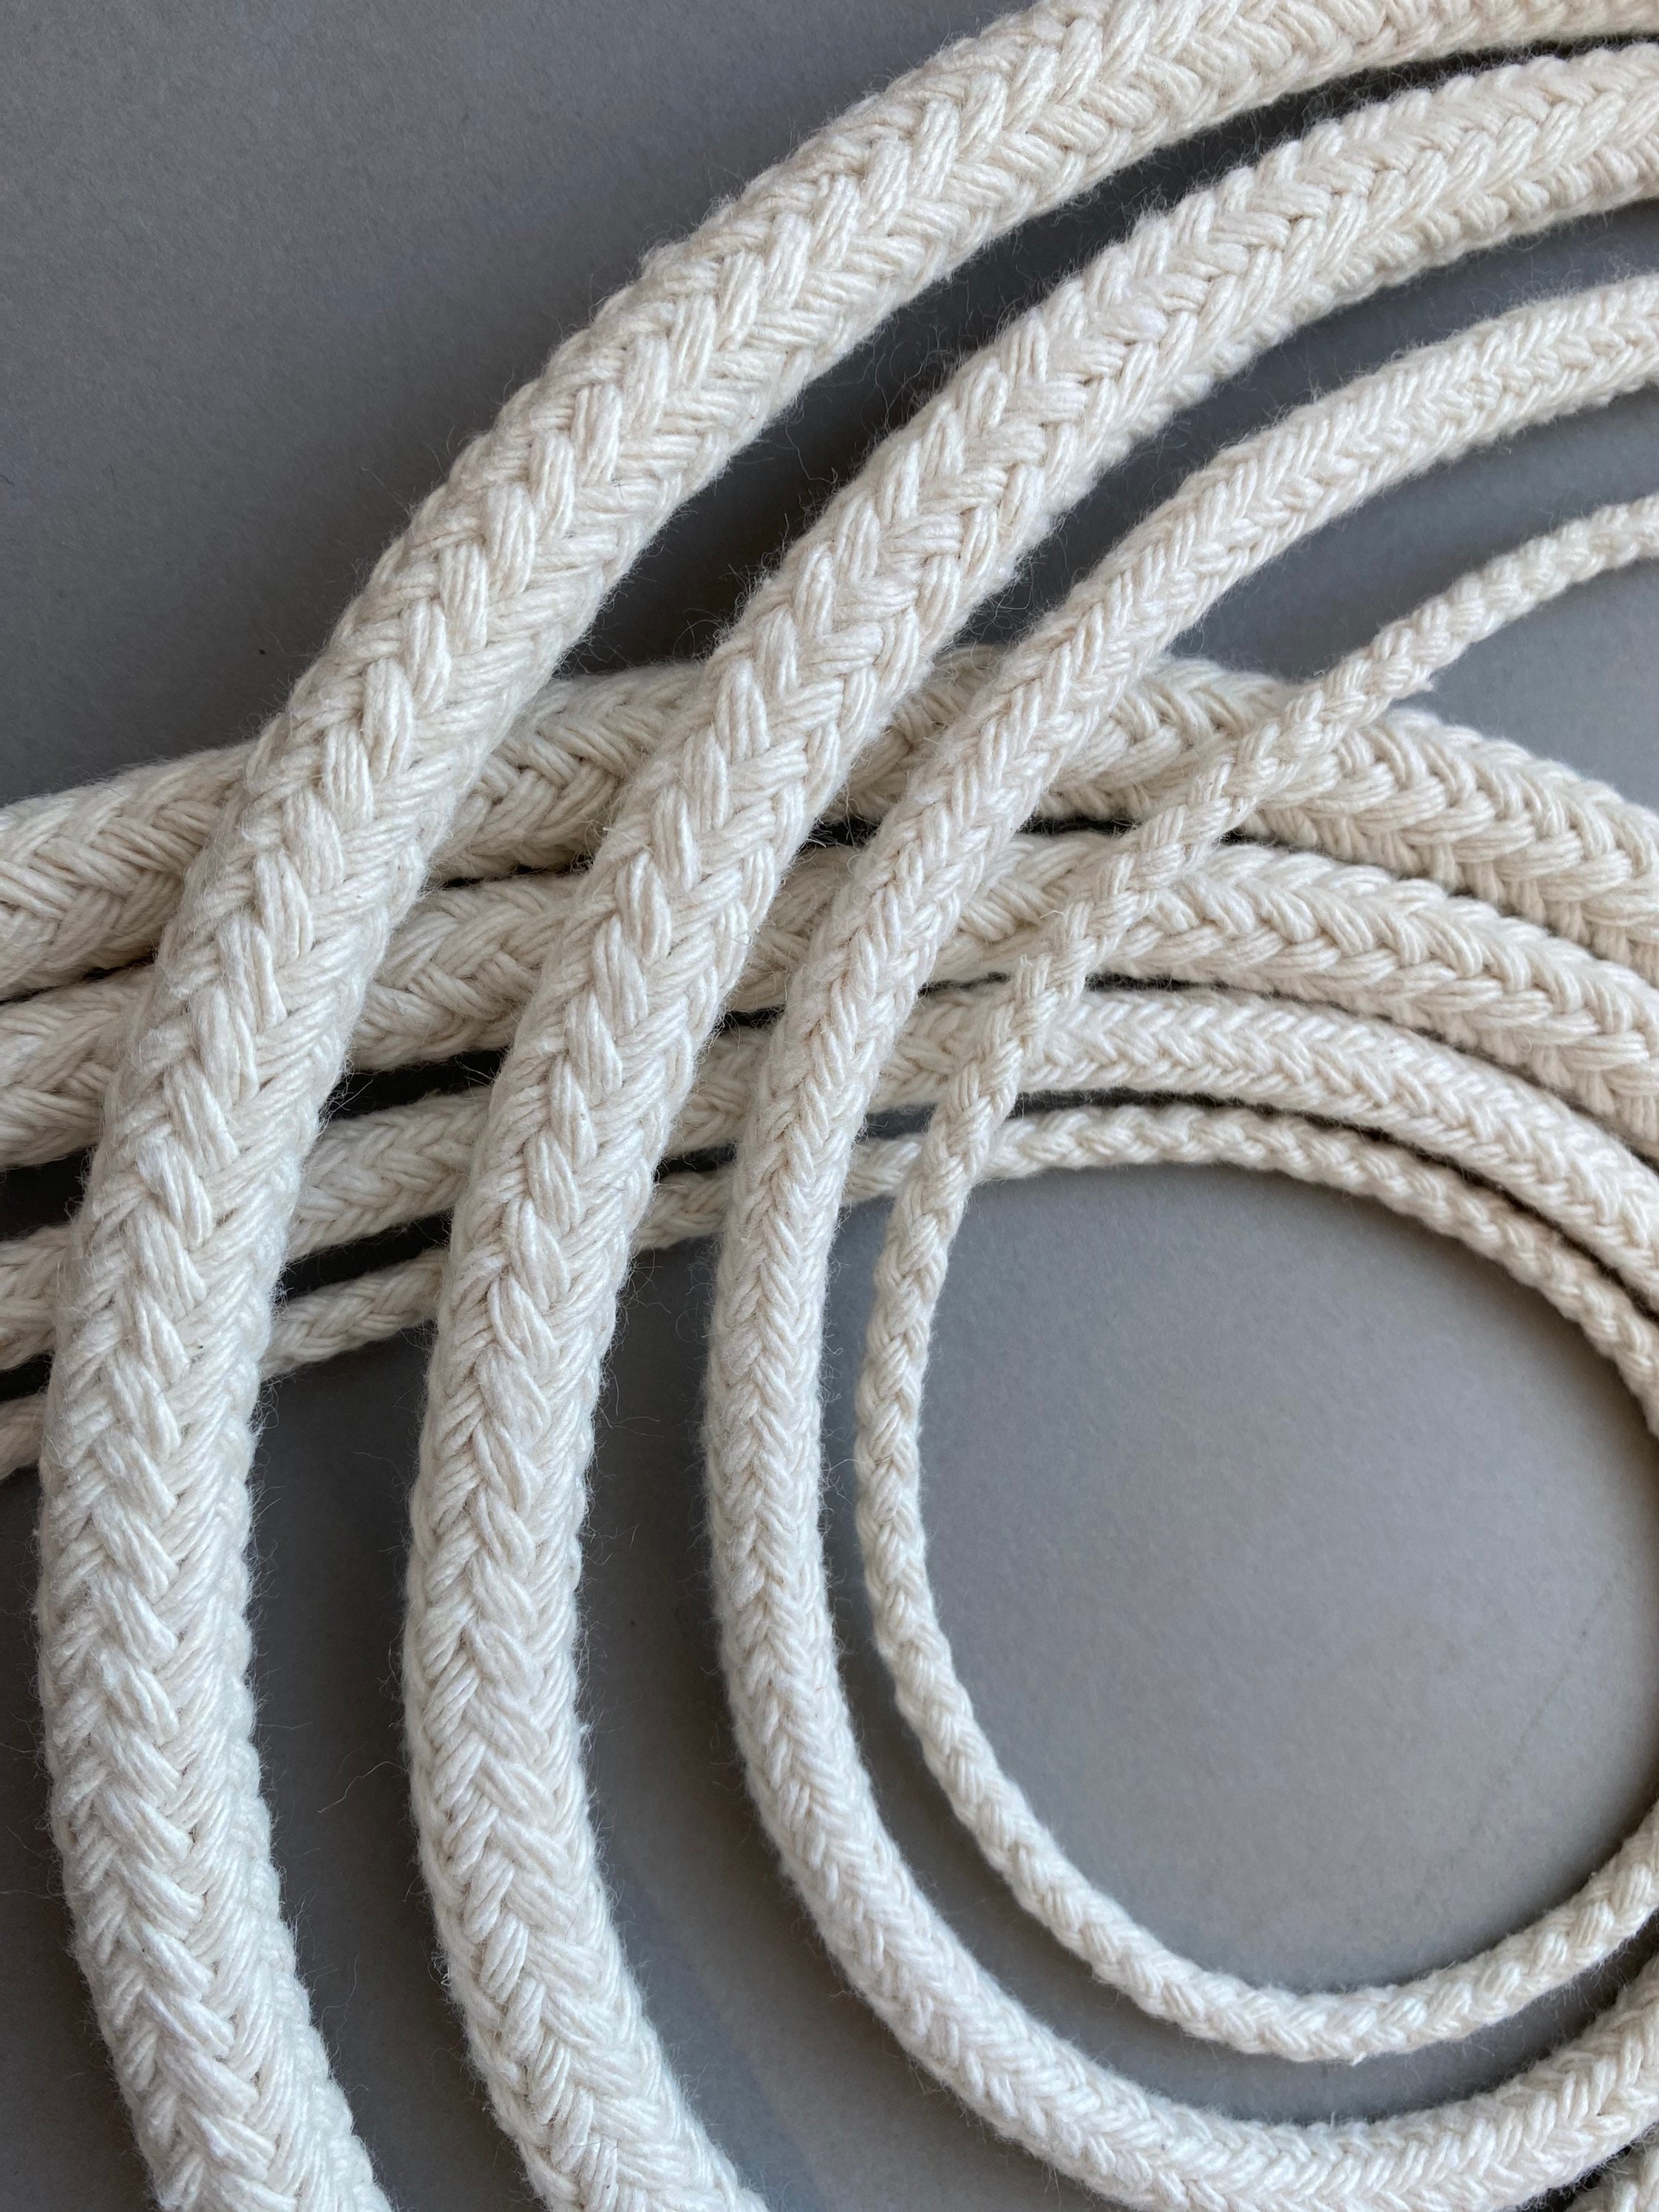 10mm Thick Cotton Rope30ft, Braided Rope, Drawstring Cord for Crafting,  Home Decor Rope, Wall Art Cord by the Yard / 30ft 10yds 9m 